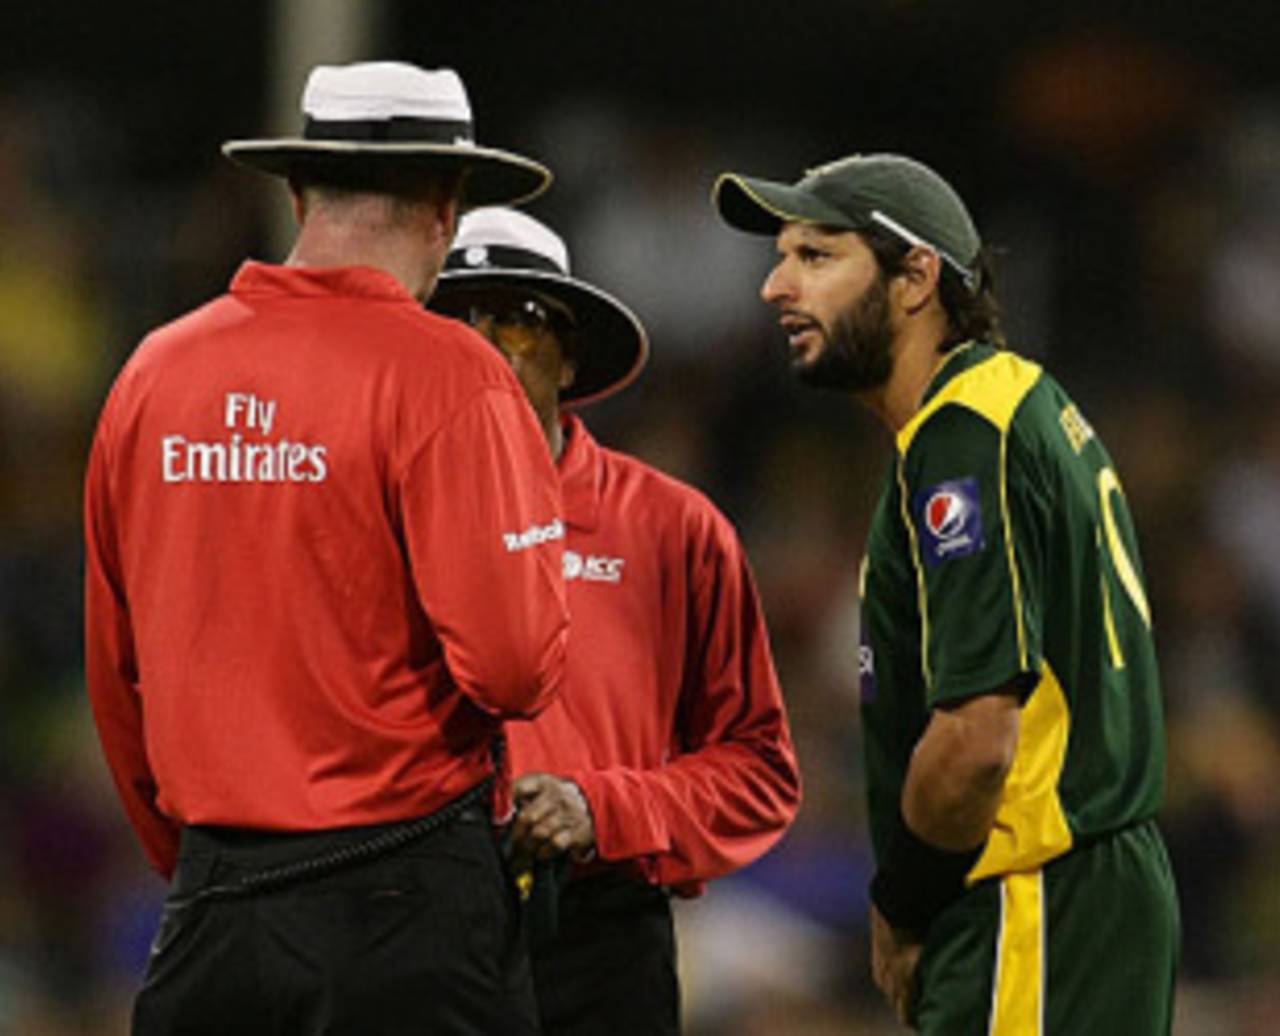 Shahid Afridi was handed a ban of two Twenty20s for his actions, a punishment that Inzamam-ul-Haq believed was light considering the seriousness of the offence&nbsp;&nbsp;&bull;&nbsp;&nbsp;Getty Images